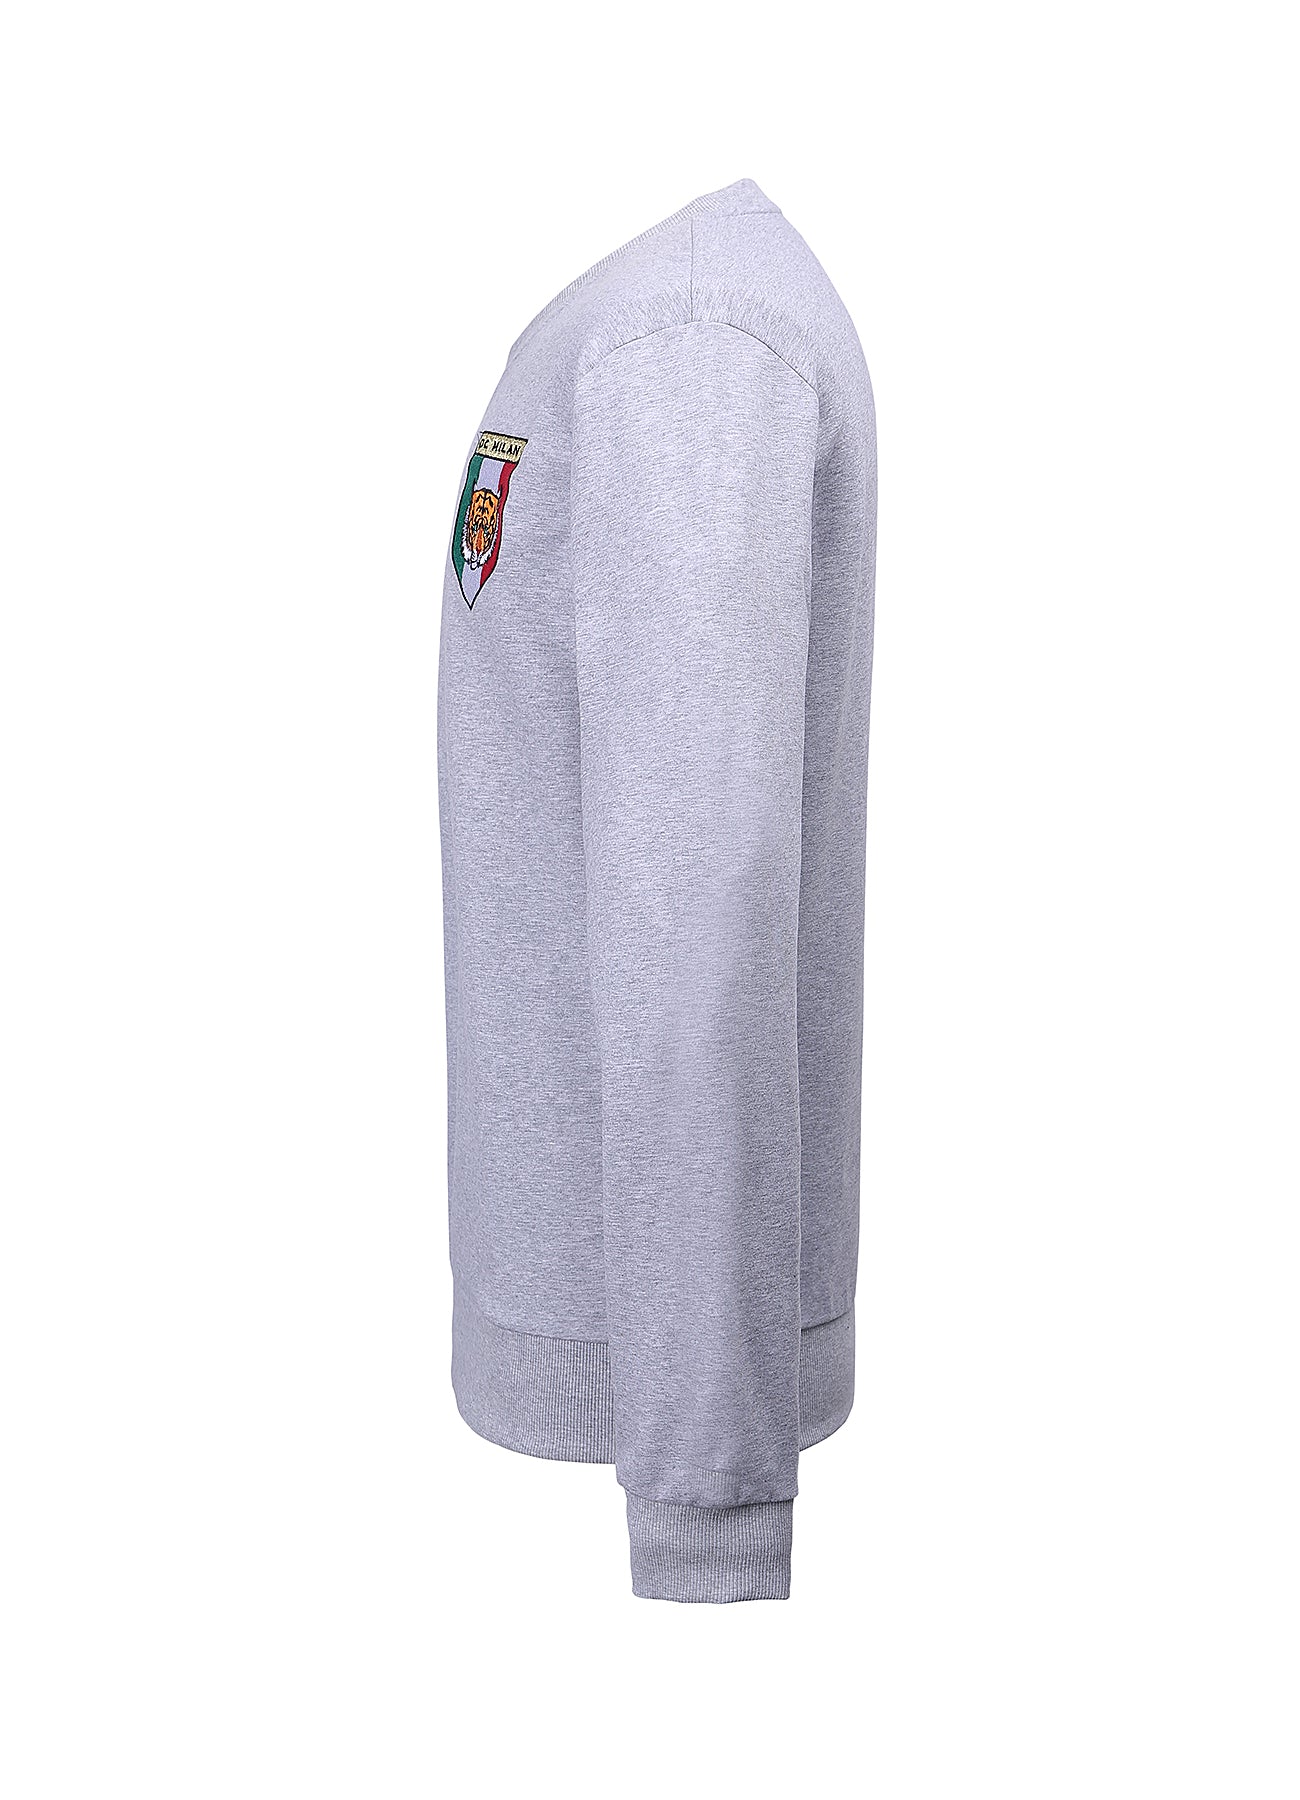 Embroidery Light Grey Cotton Sweatshirt With Small Logo